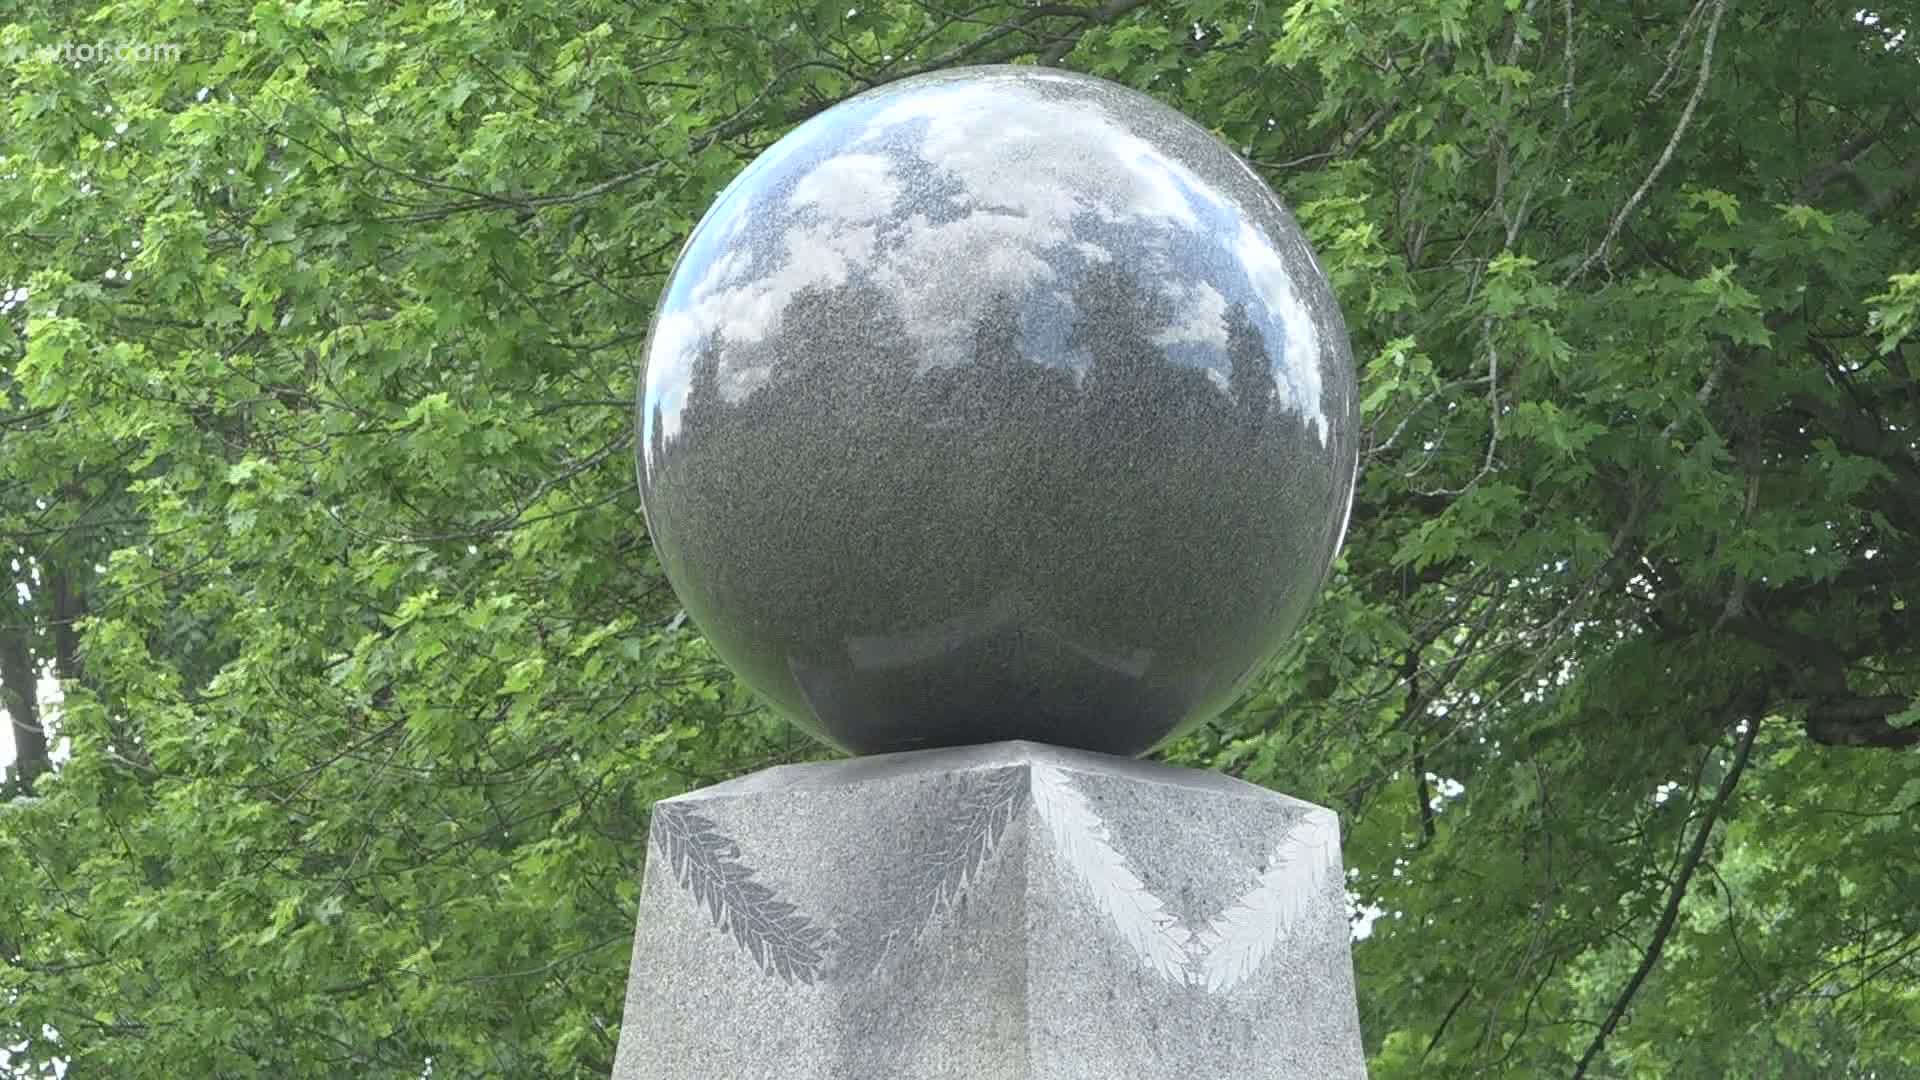 The ball was first set in place back in 1896. Since then, it has moved ever so slightly every year.